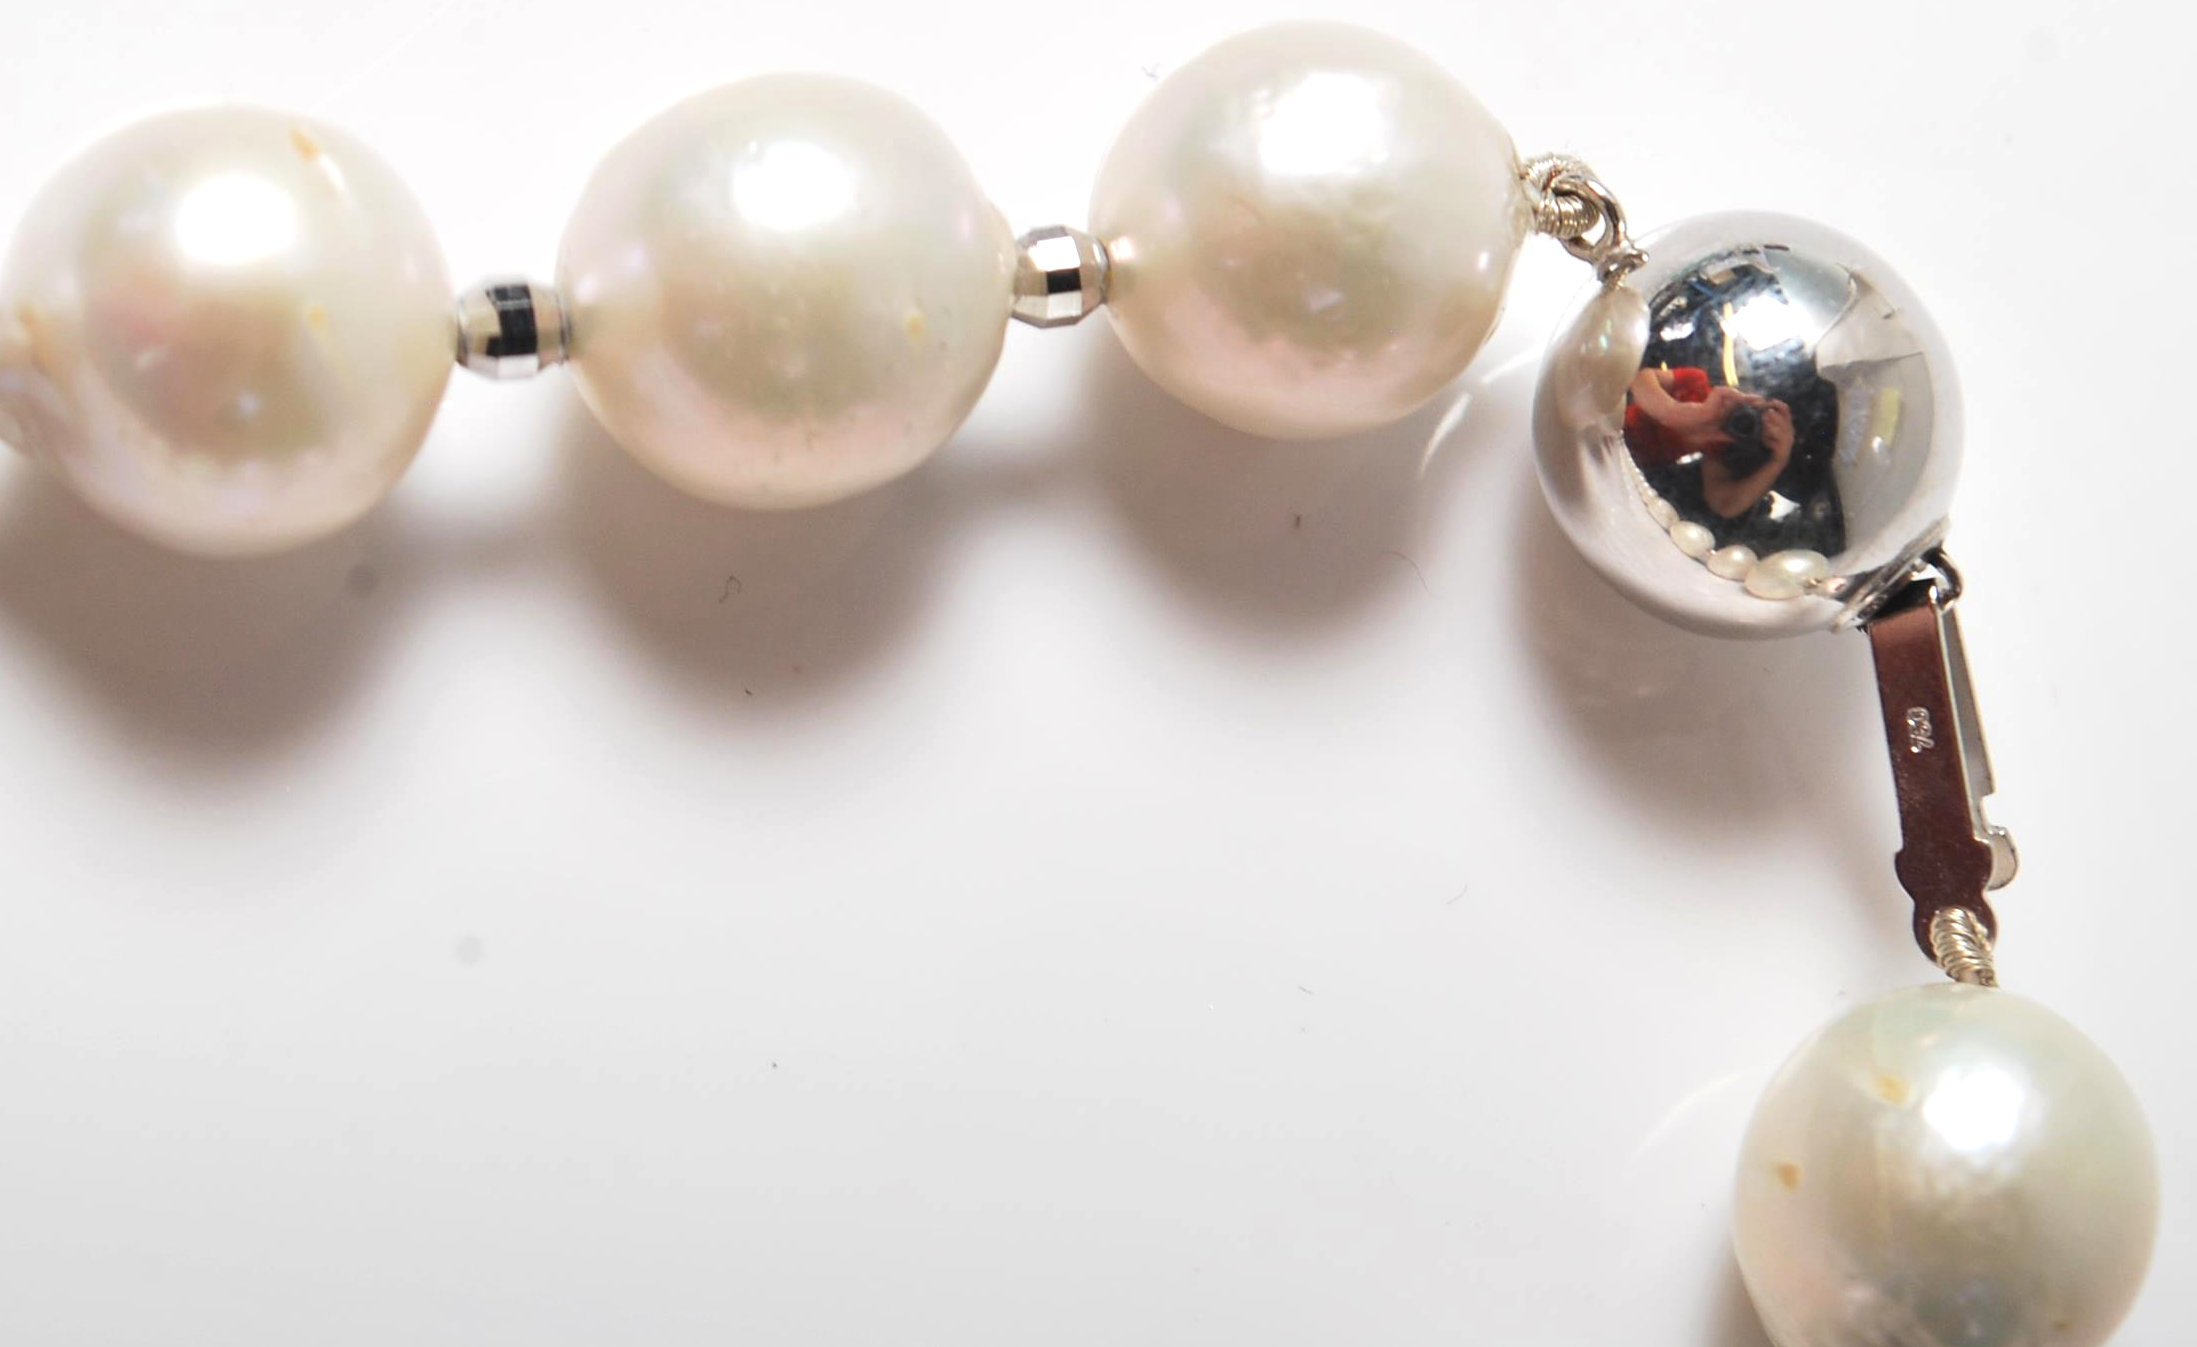 LARGE CULTURED PEARL NECKLACE - Image 4 of 6